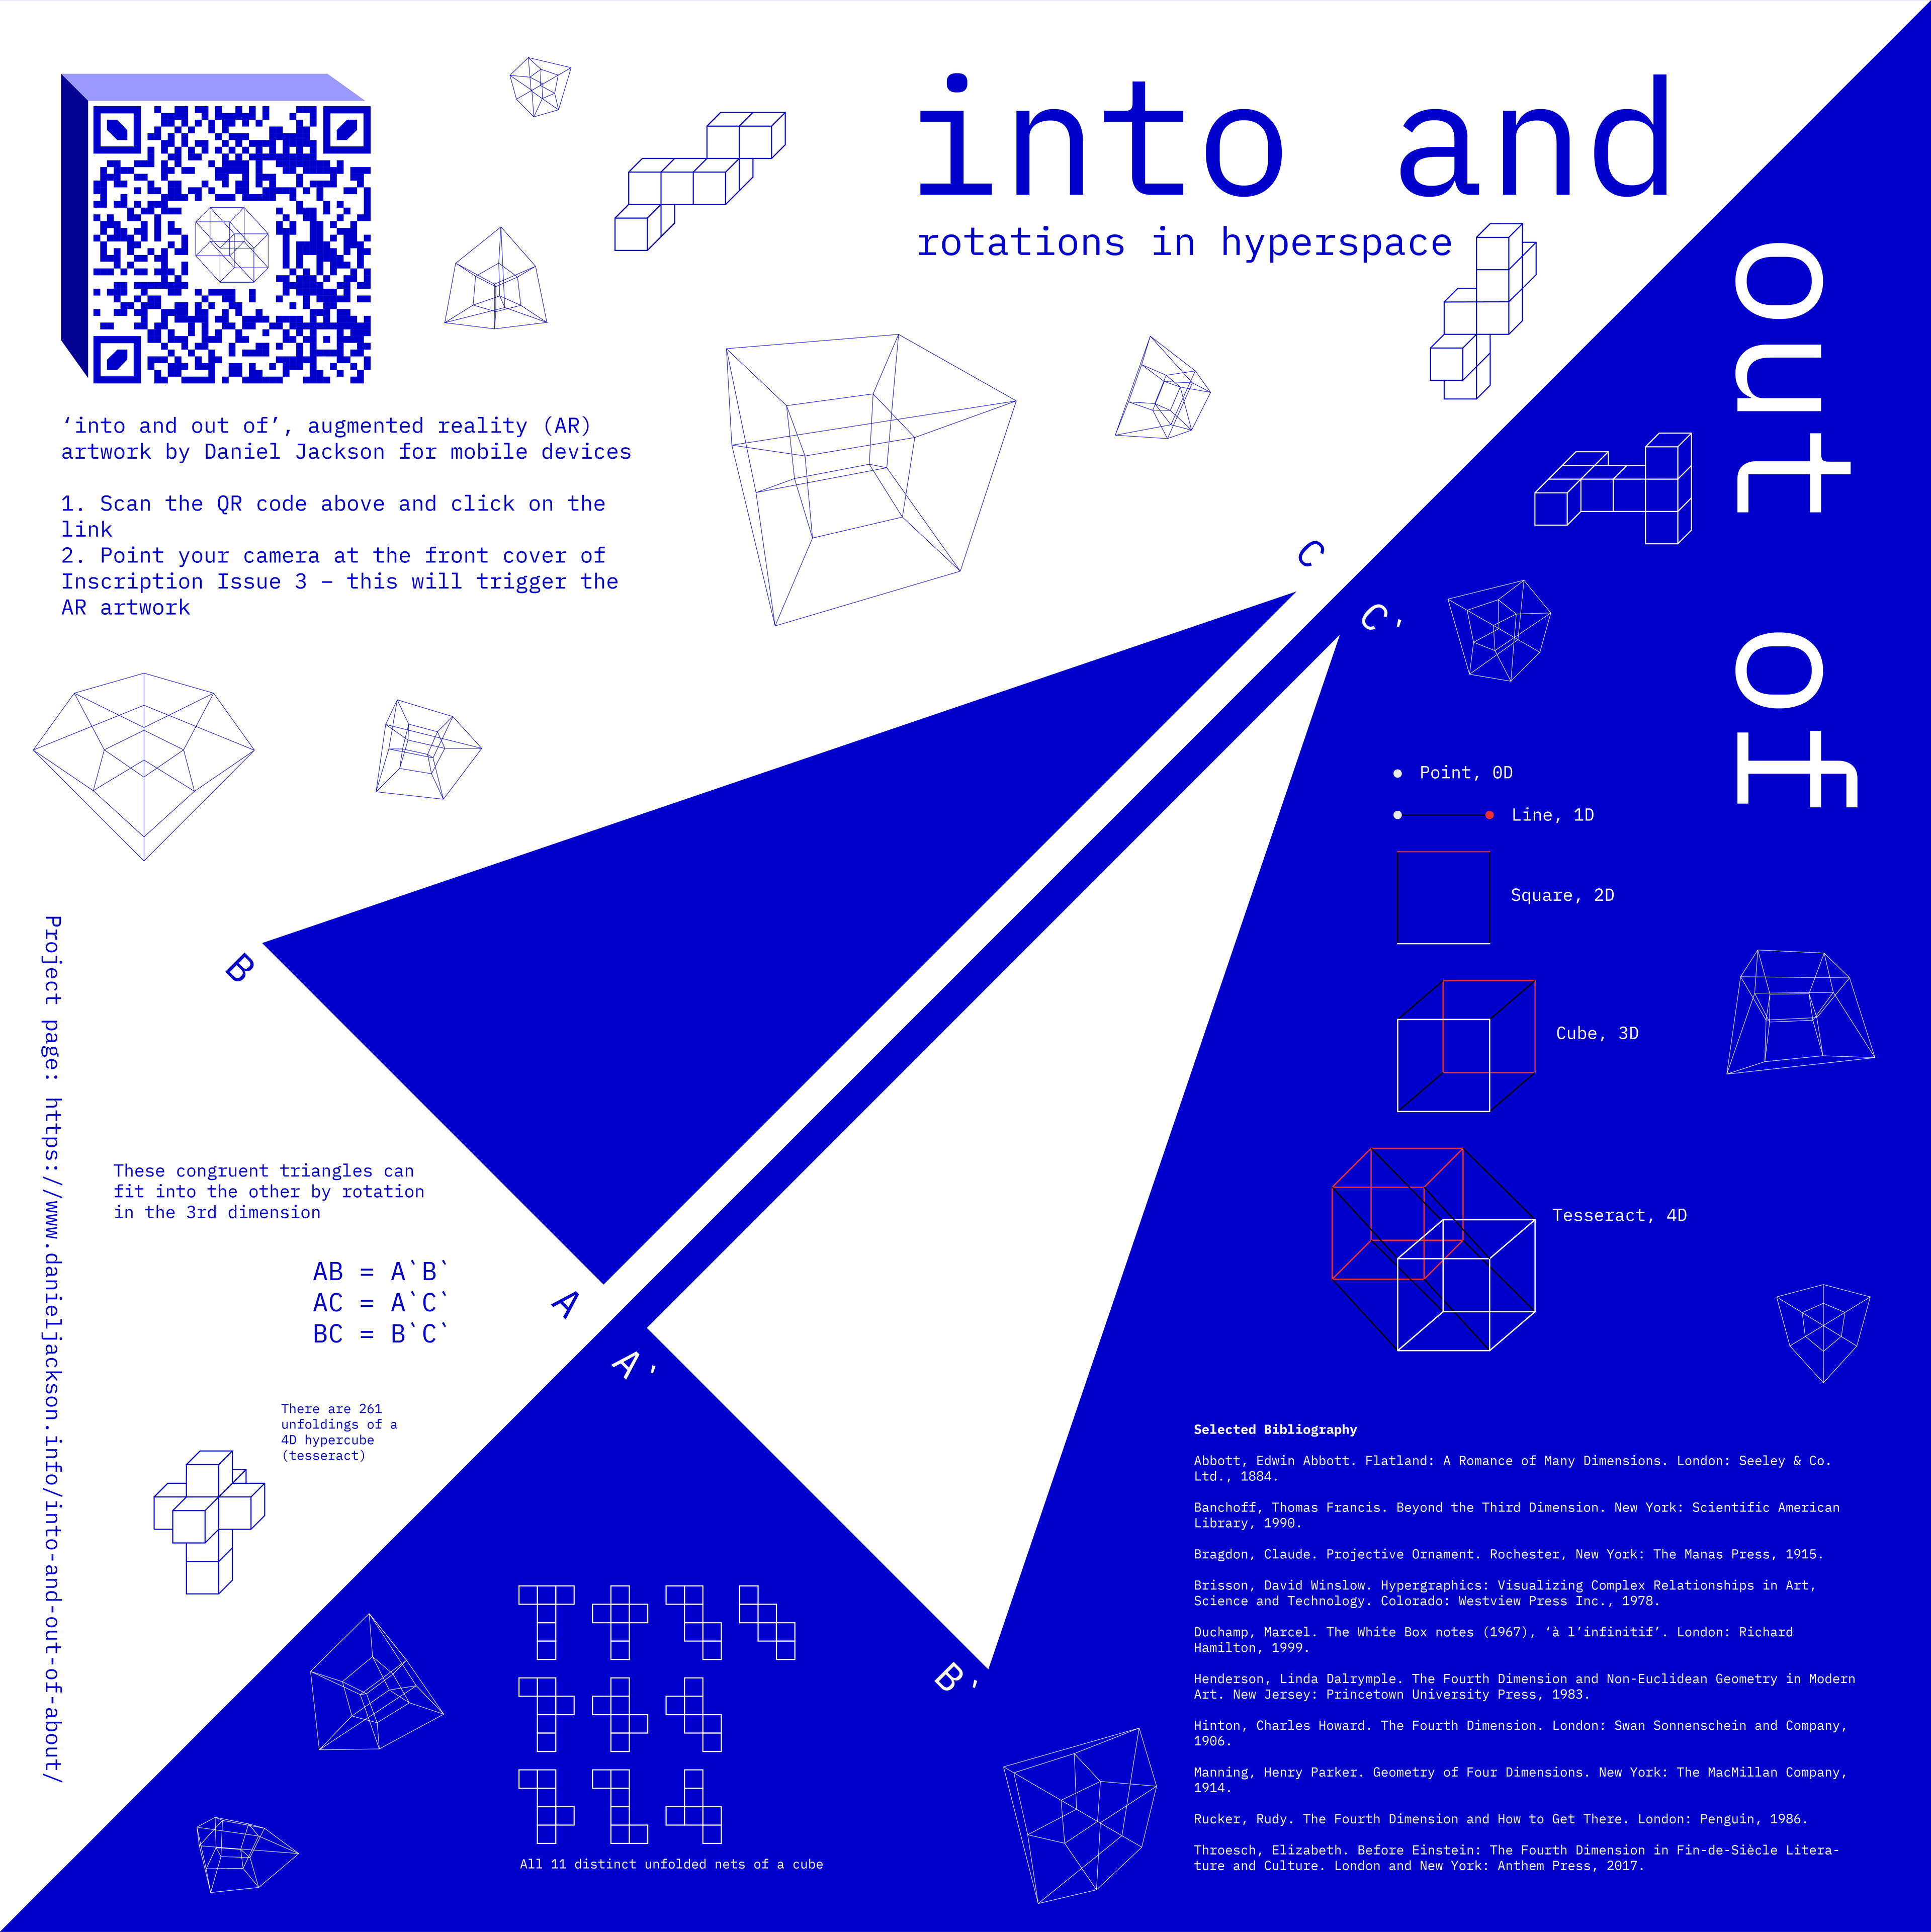 Diagrammatic illustration with 2 large triangles in blue and white